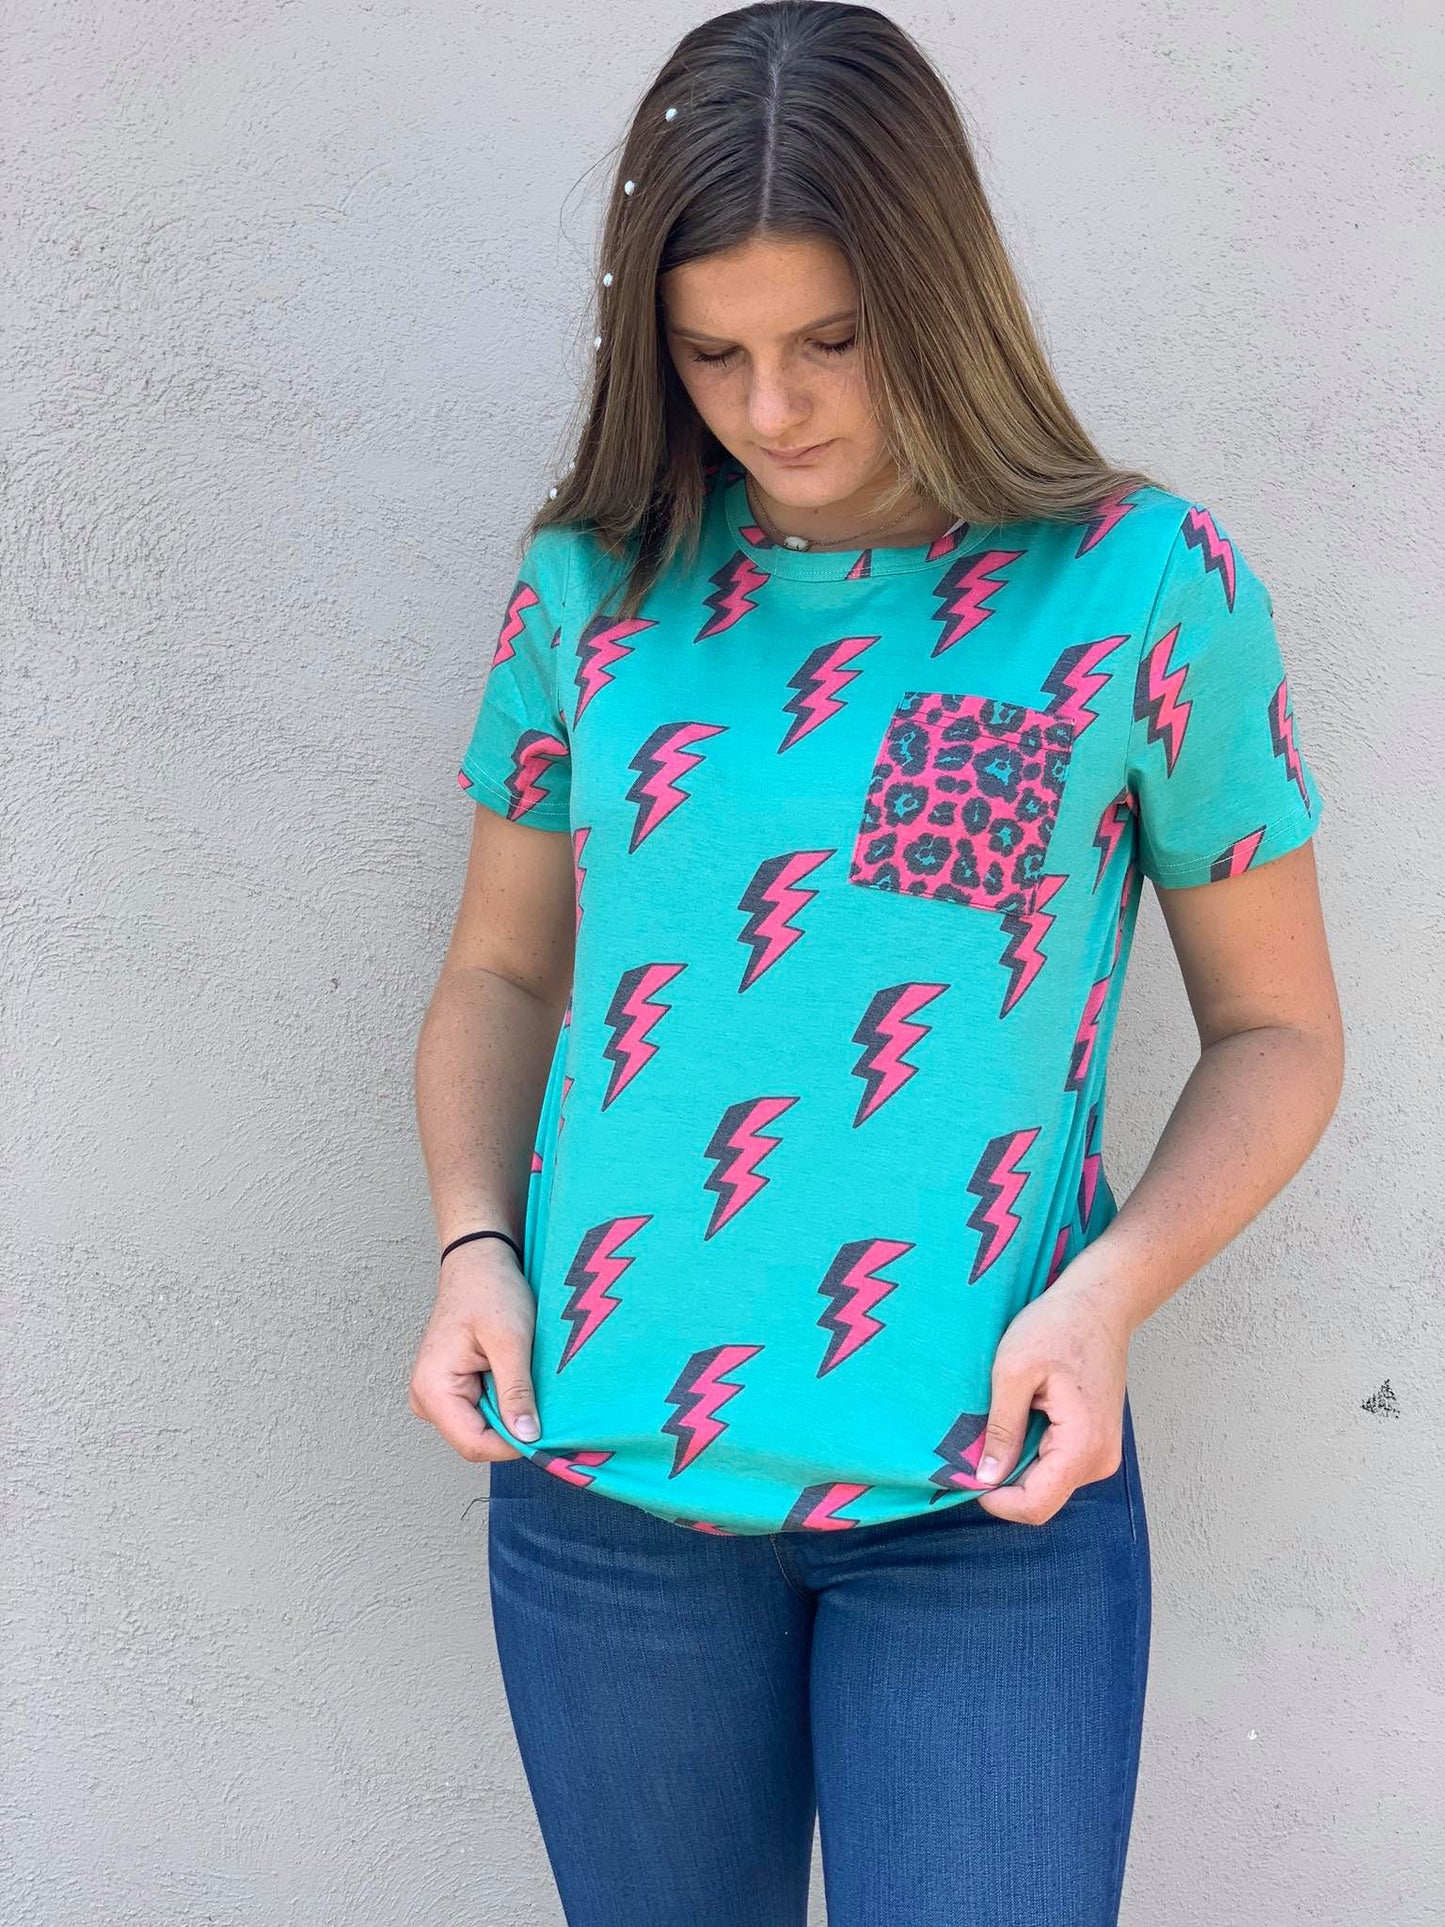 Crazy Train Electric Slide Lightning and Leopard Tee